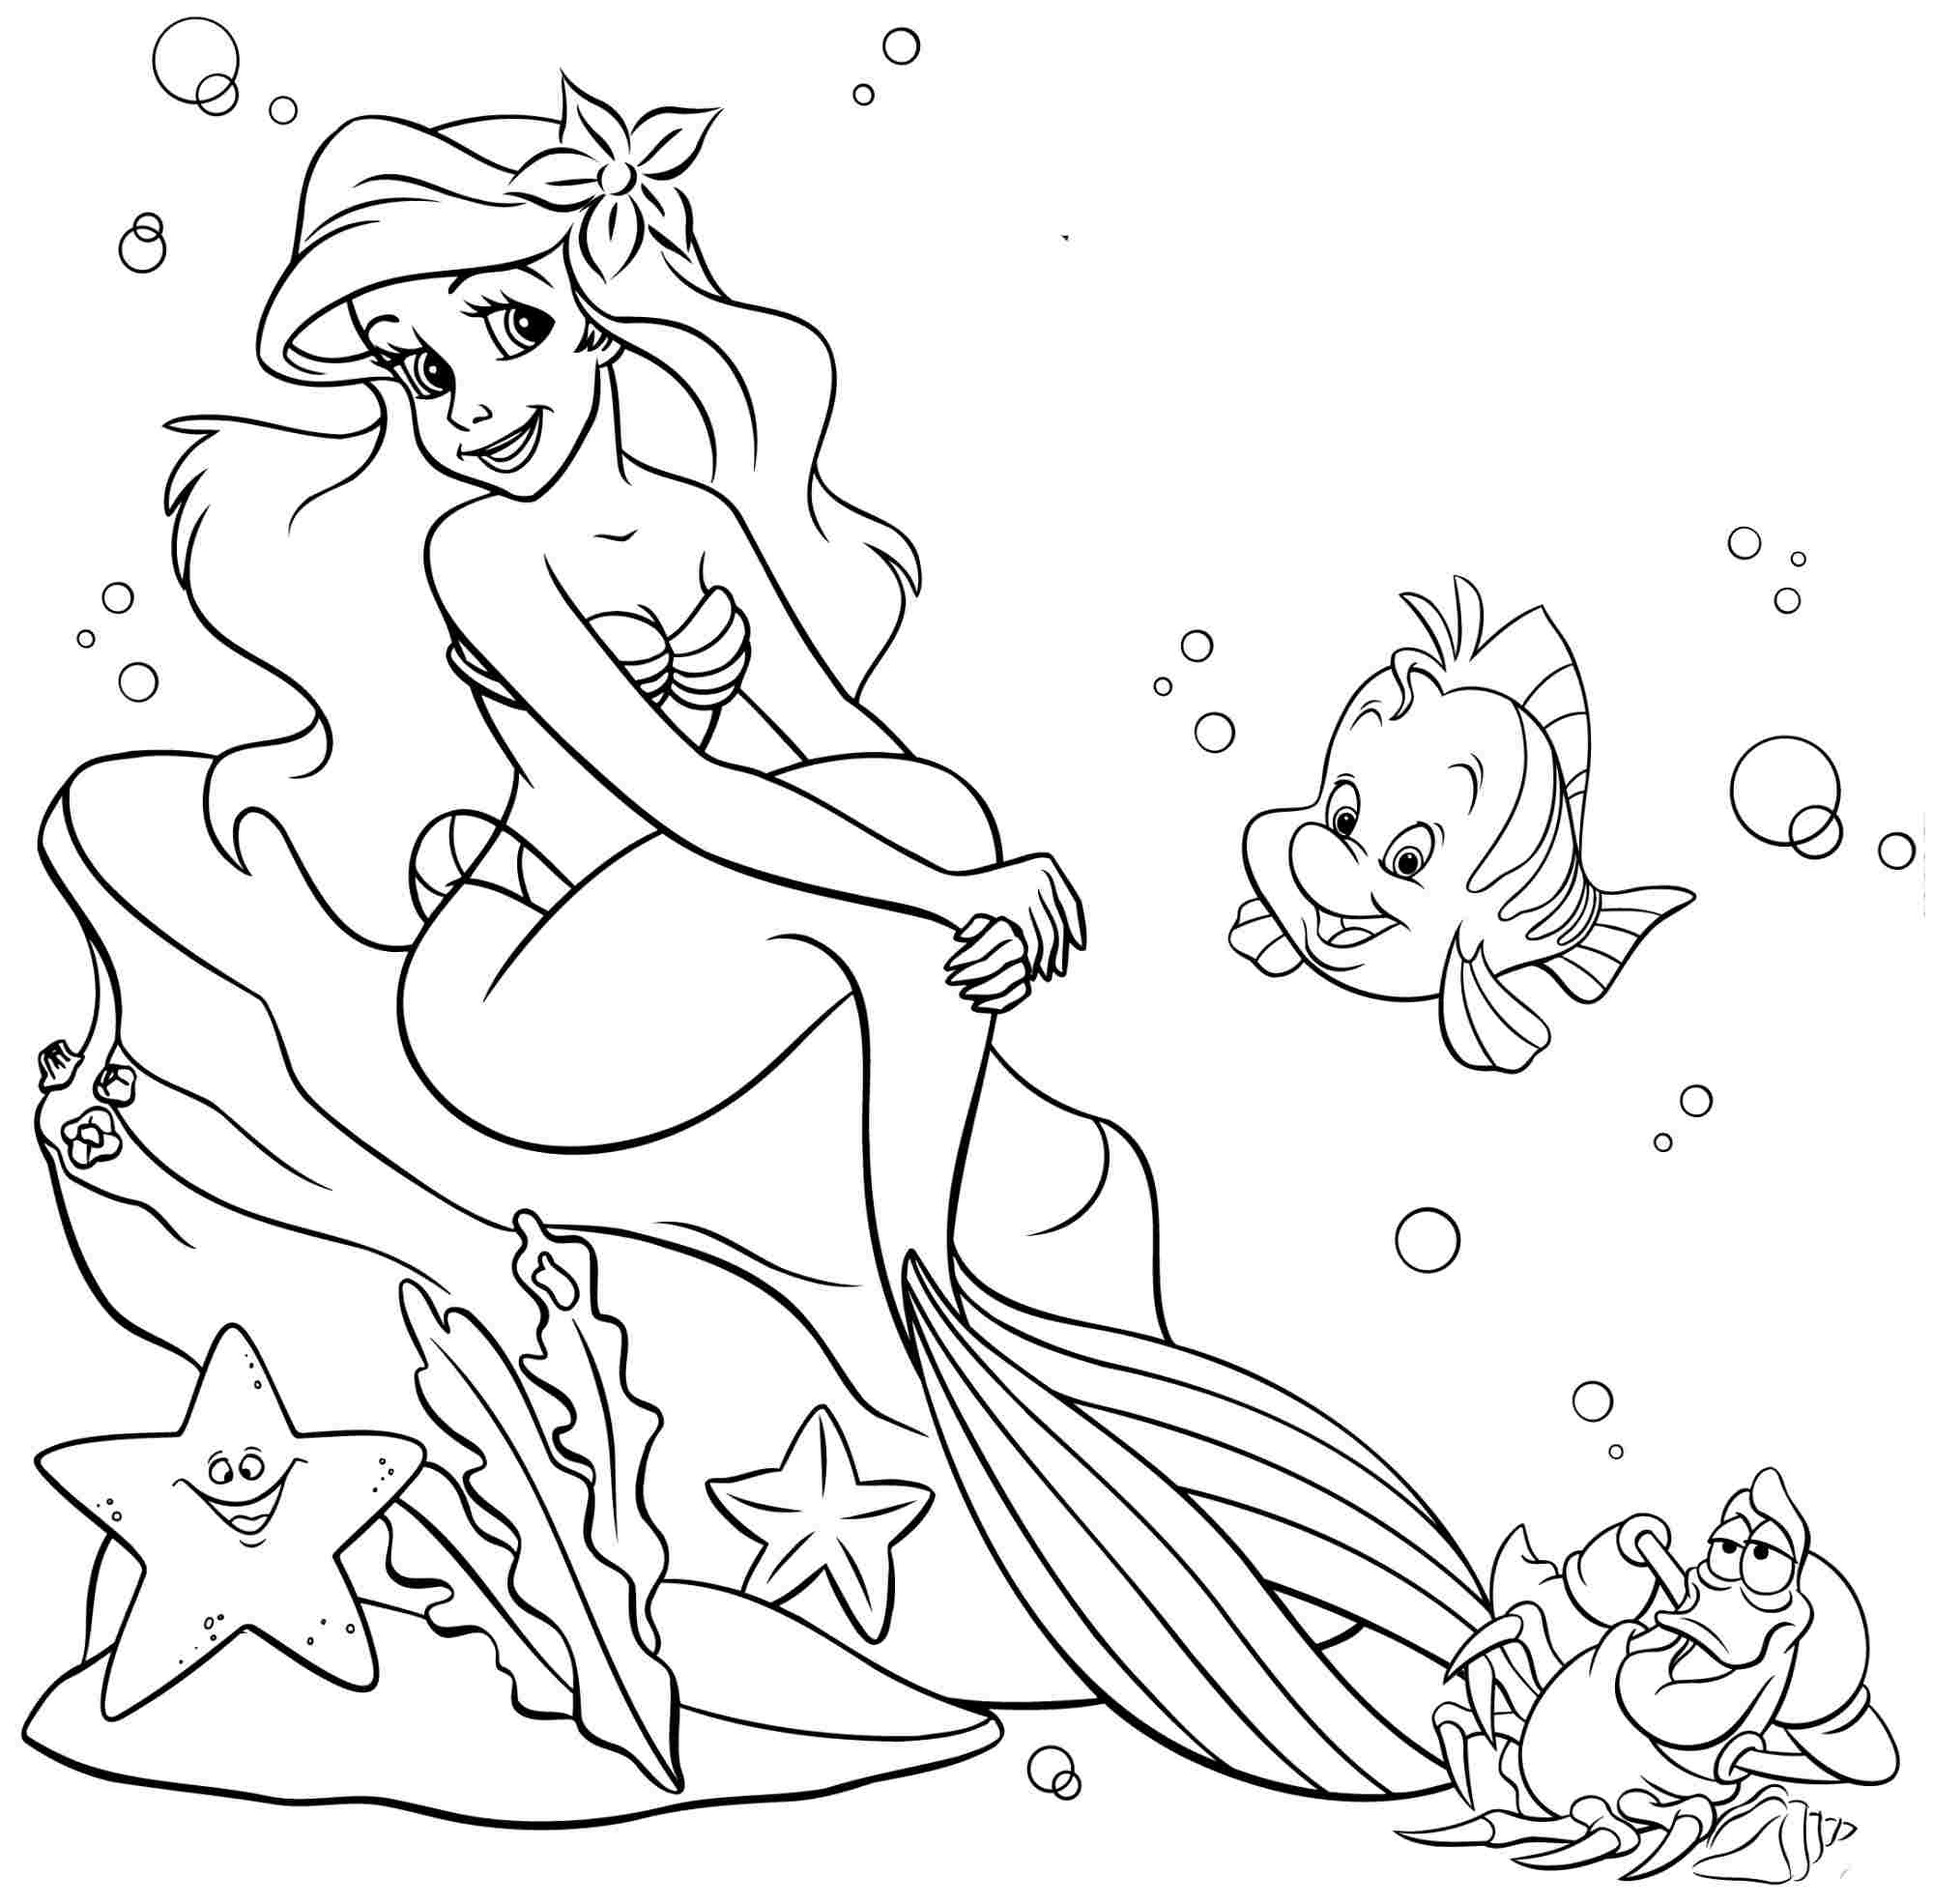 The little mermaid coloring pages to download and print for free